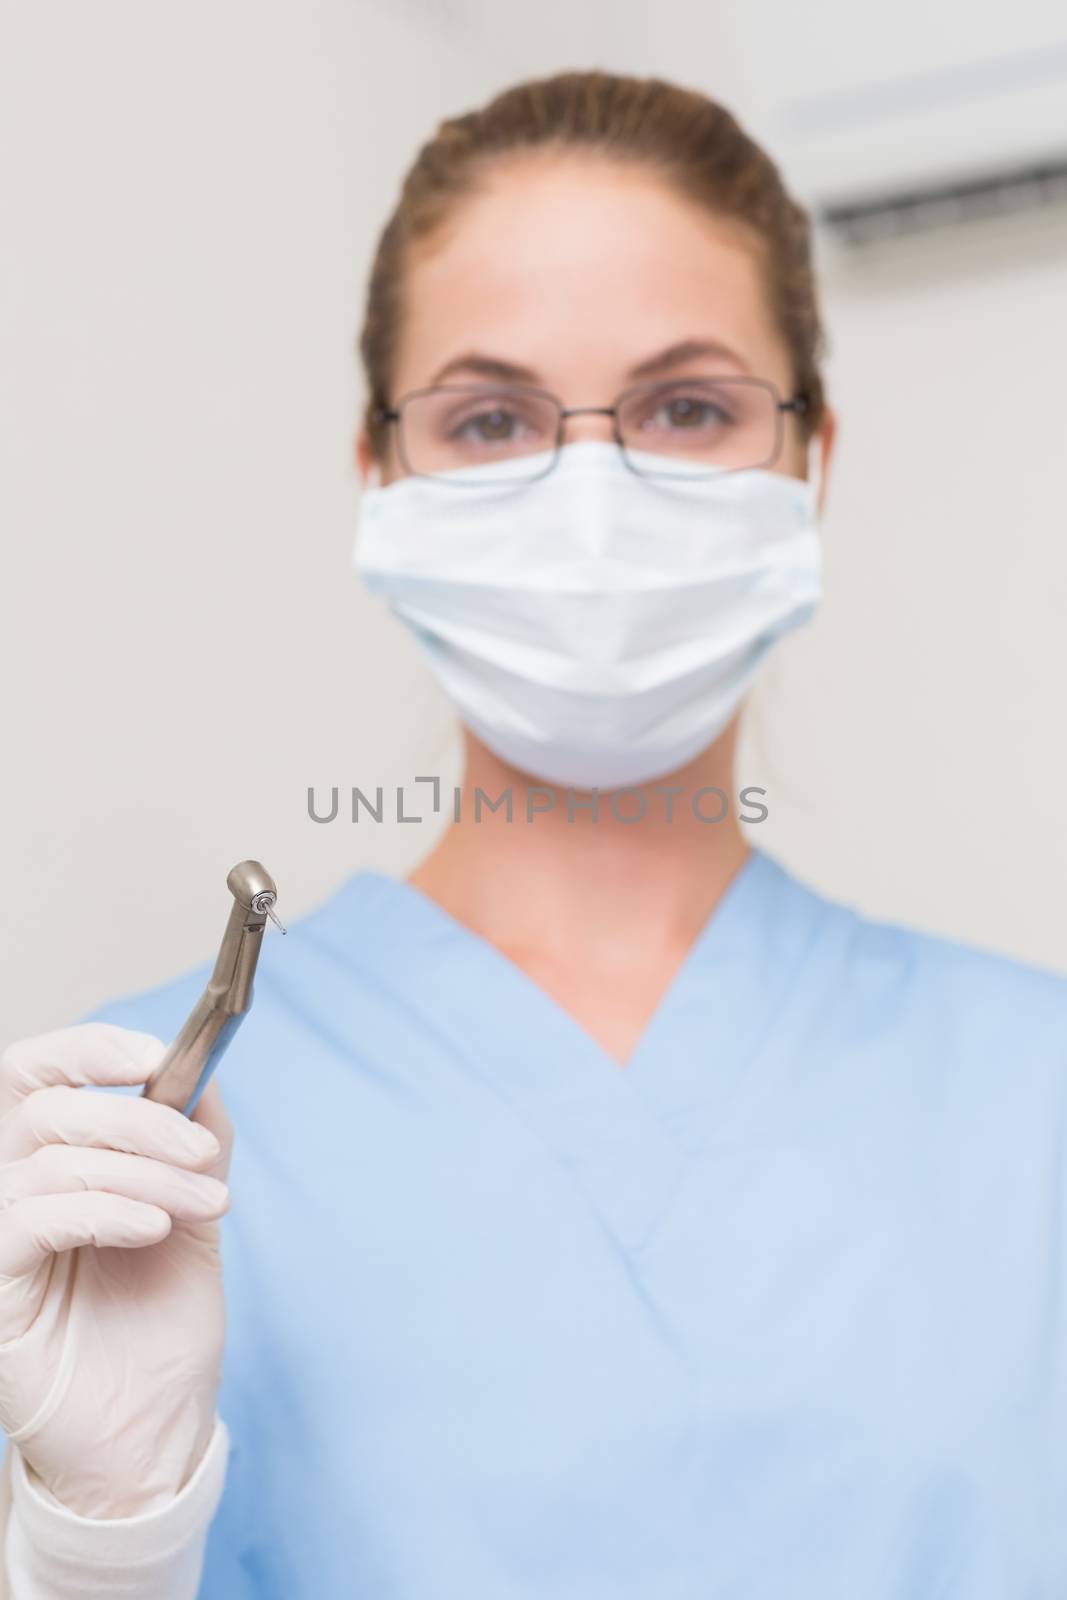 Dentist in blue scrubs holding drill looking at camera at the dental clinic